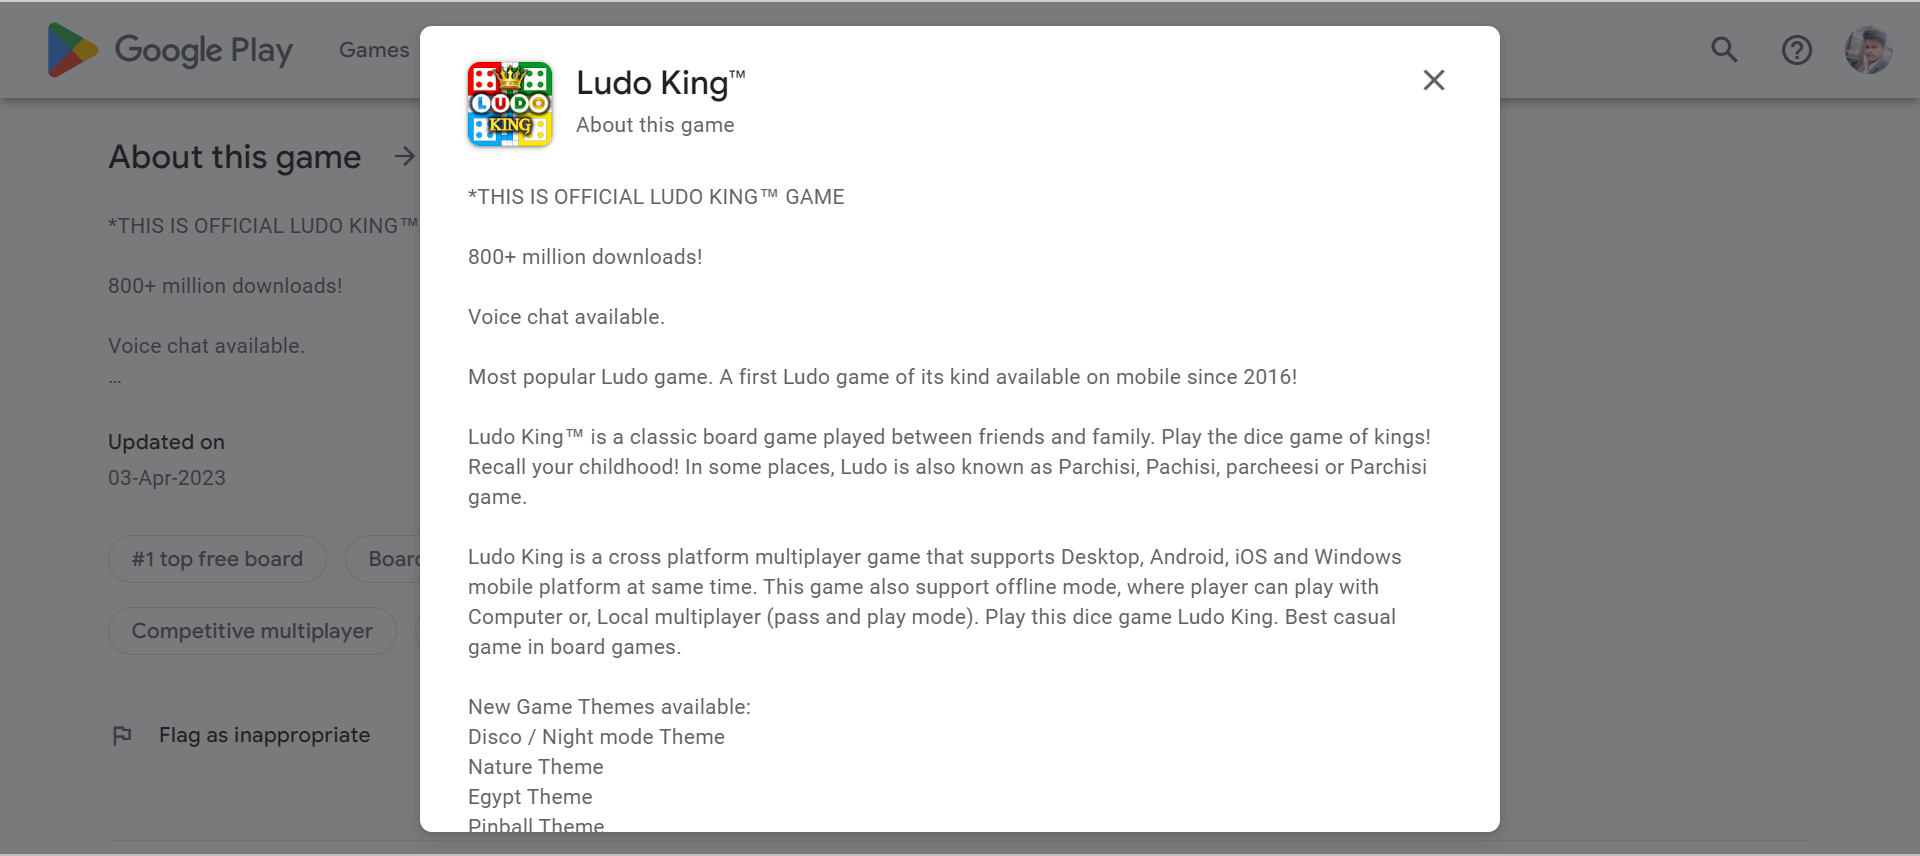 ludo-king-full-detailed-content